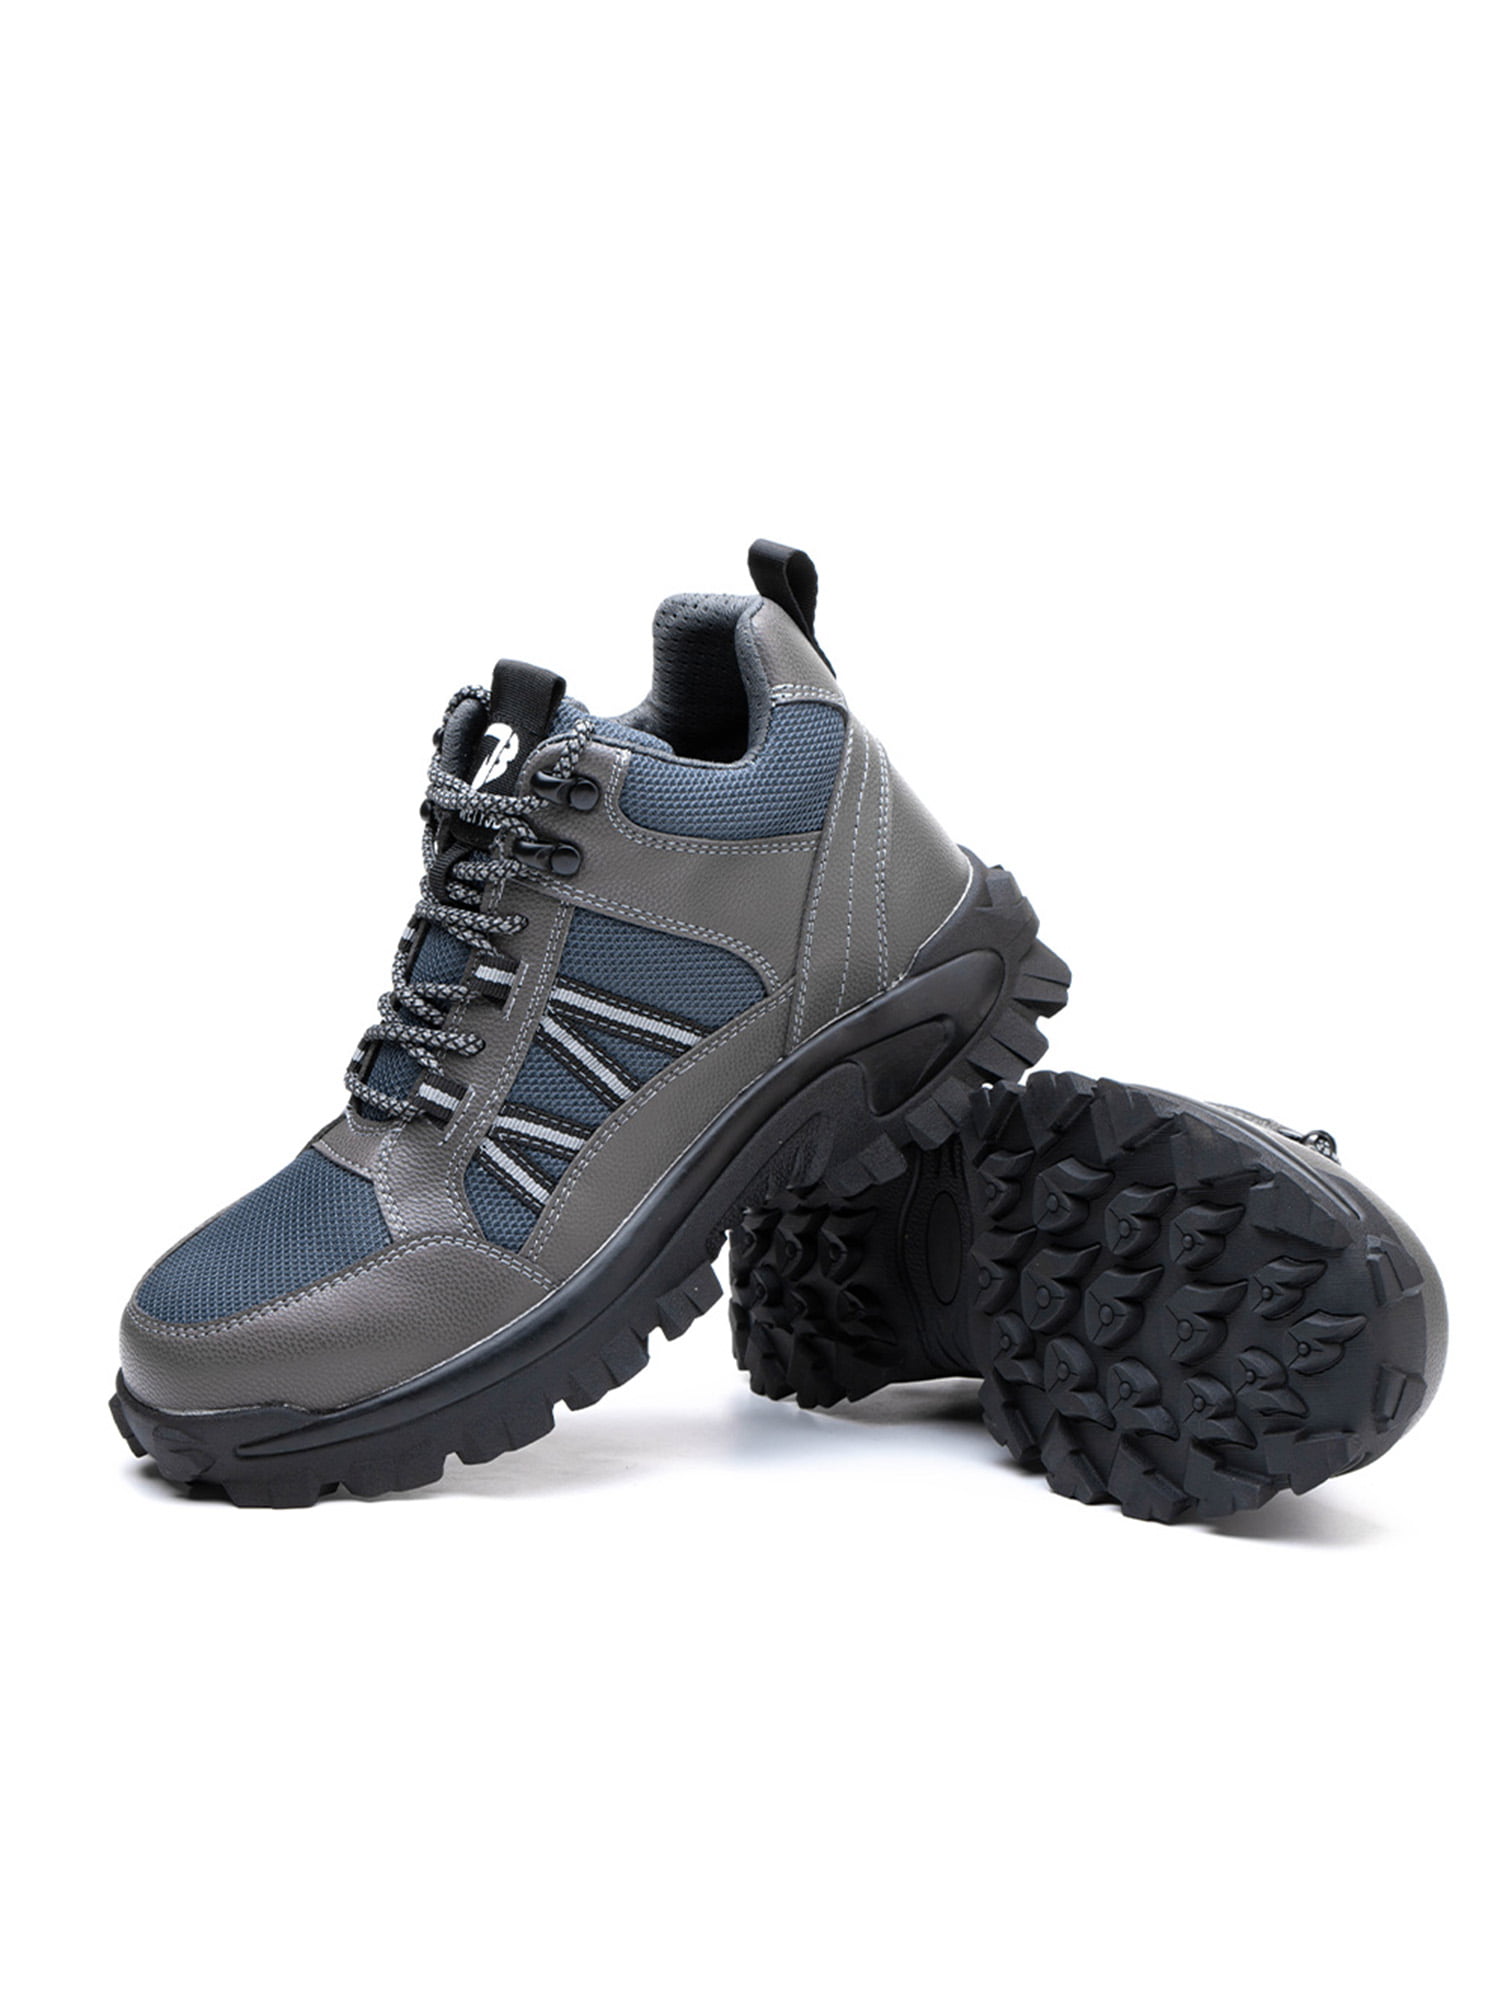 Men Safety Shoes Steel Toe Work Boots Indestructible Buffer Sole Hiking Sneakers 